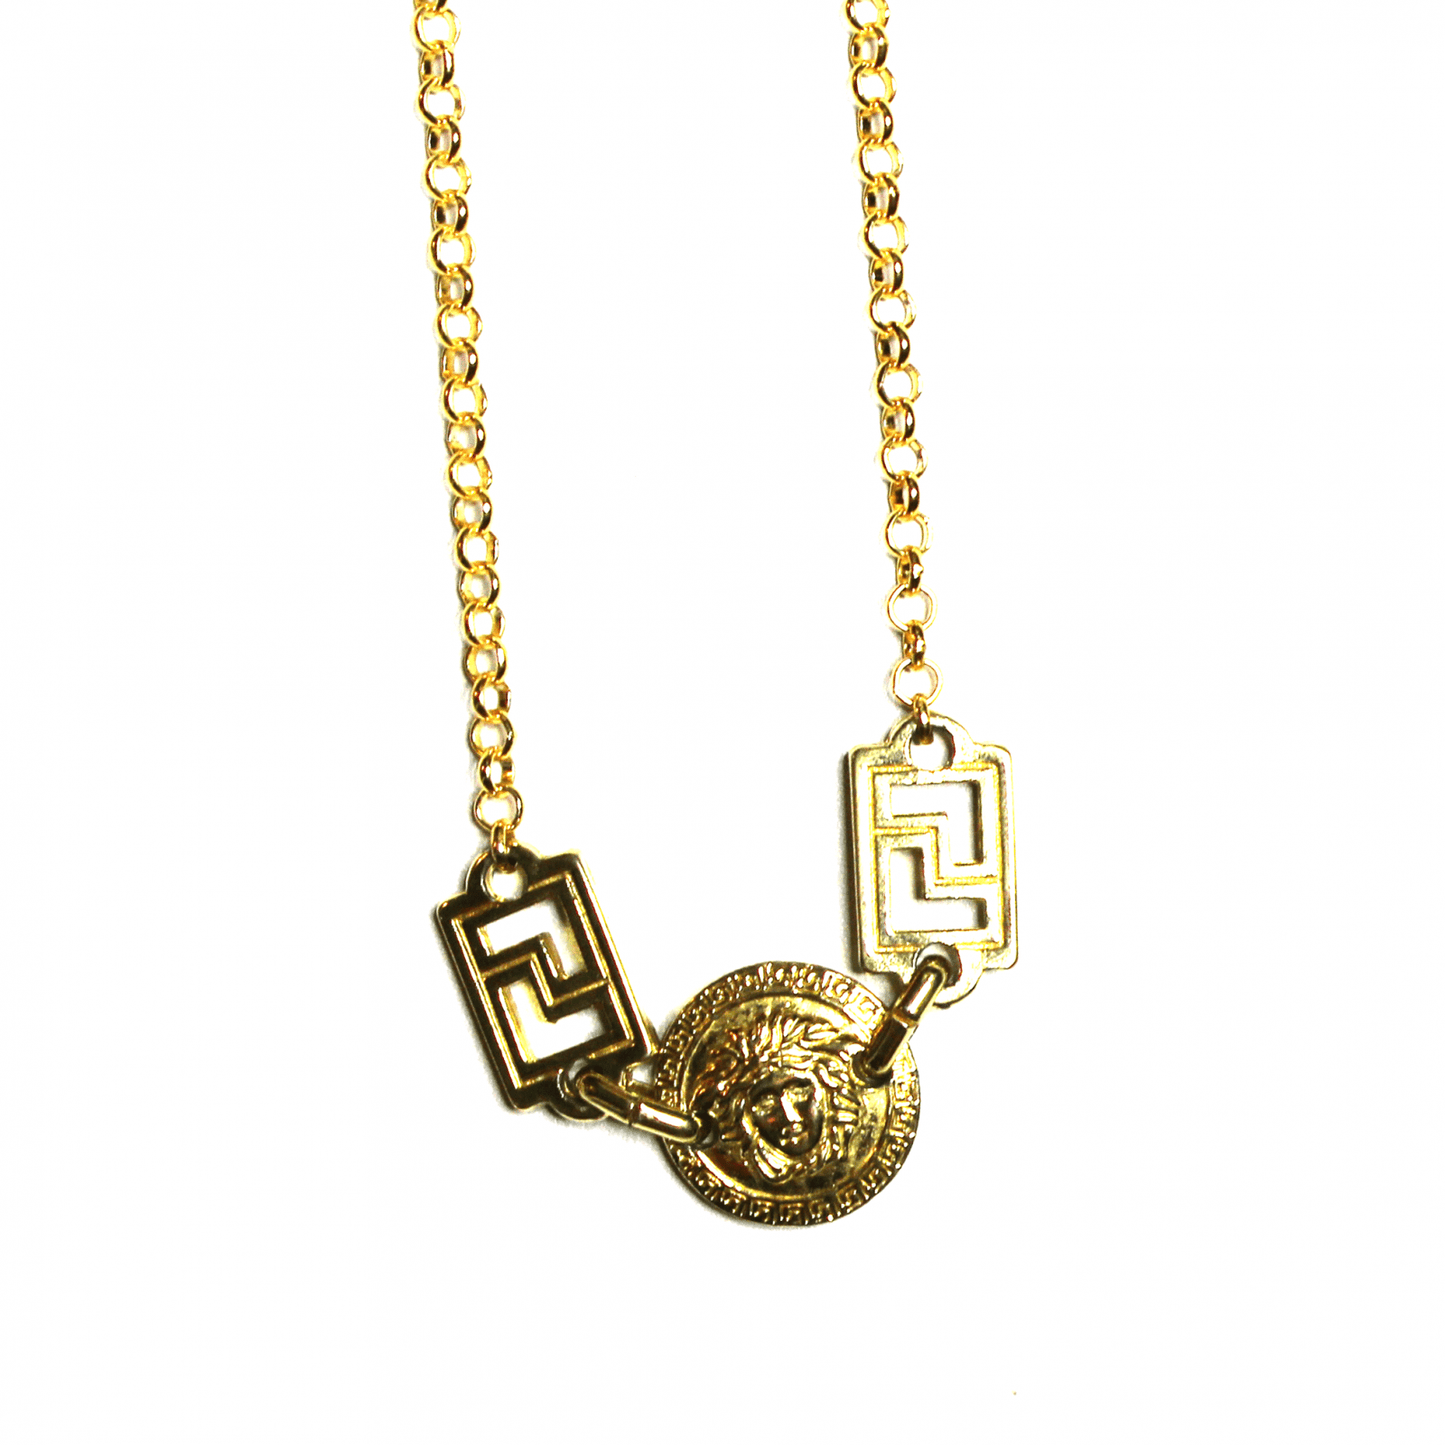 Small Gold Gianni Versace Double Sided Medusa Head Coin Chain with Greek Key Accents RSTKD Vintage